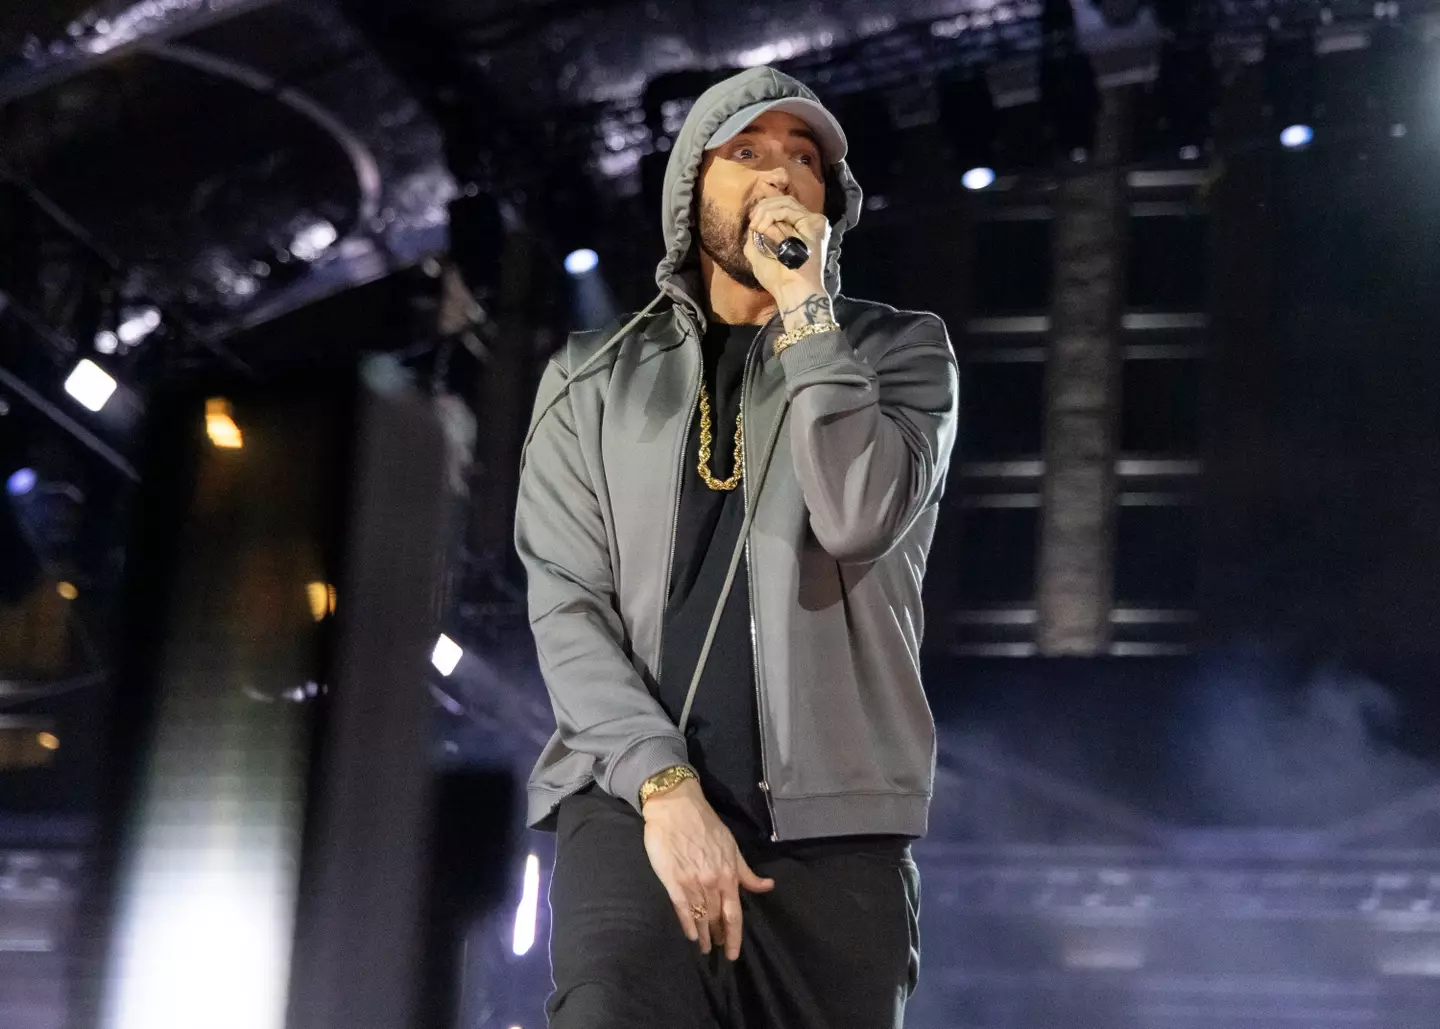 The rapper often sings about his family. (Scott Legato/Getty Images)